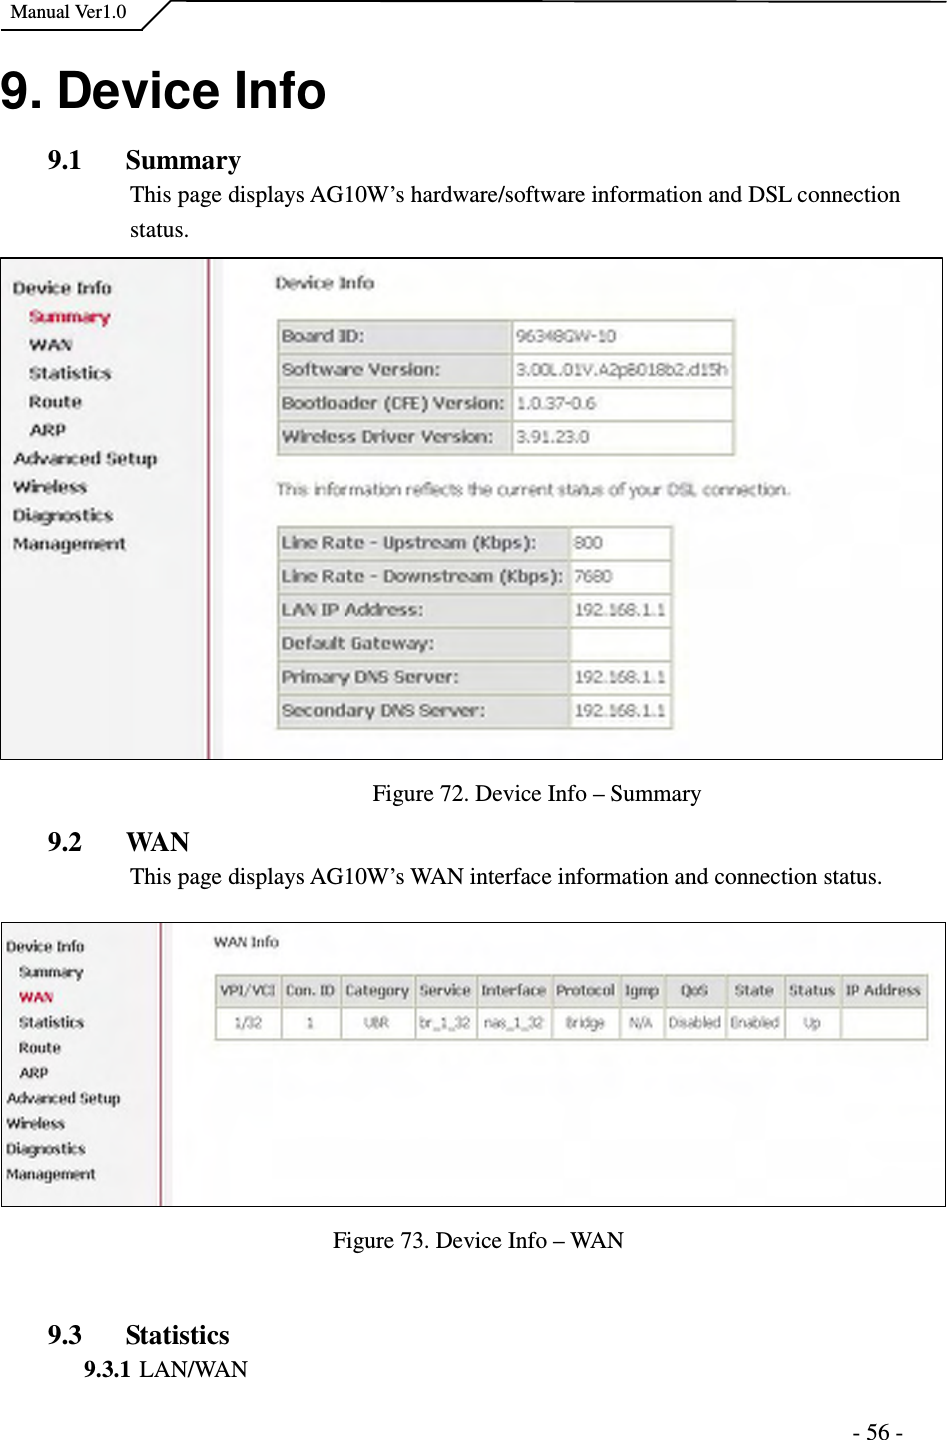    Manual Ver1.0                                                                      - 56 - 9. Device Info 9.1 Summary This page displays AG10W’s hardware/software information and DSL connection status.            Figure 72. Device Info – Summary 9.2 WAN This page displays AG10W’s WAN interface information and connection status.   Figure 73. Device Info – WAN  9.3 Statistics 9.3.1 LAN/WAN 